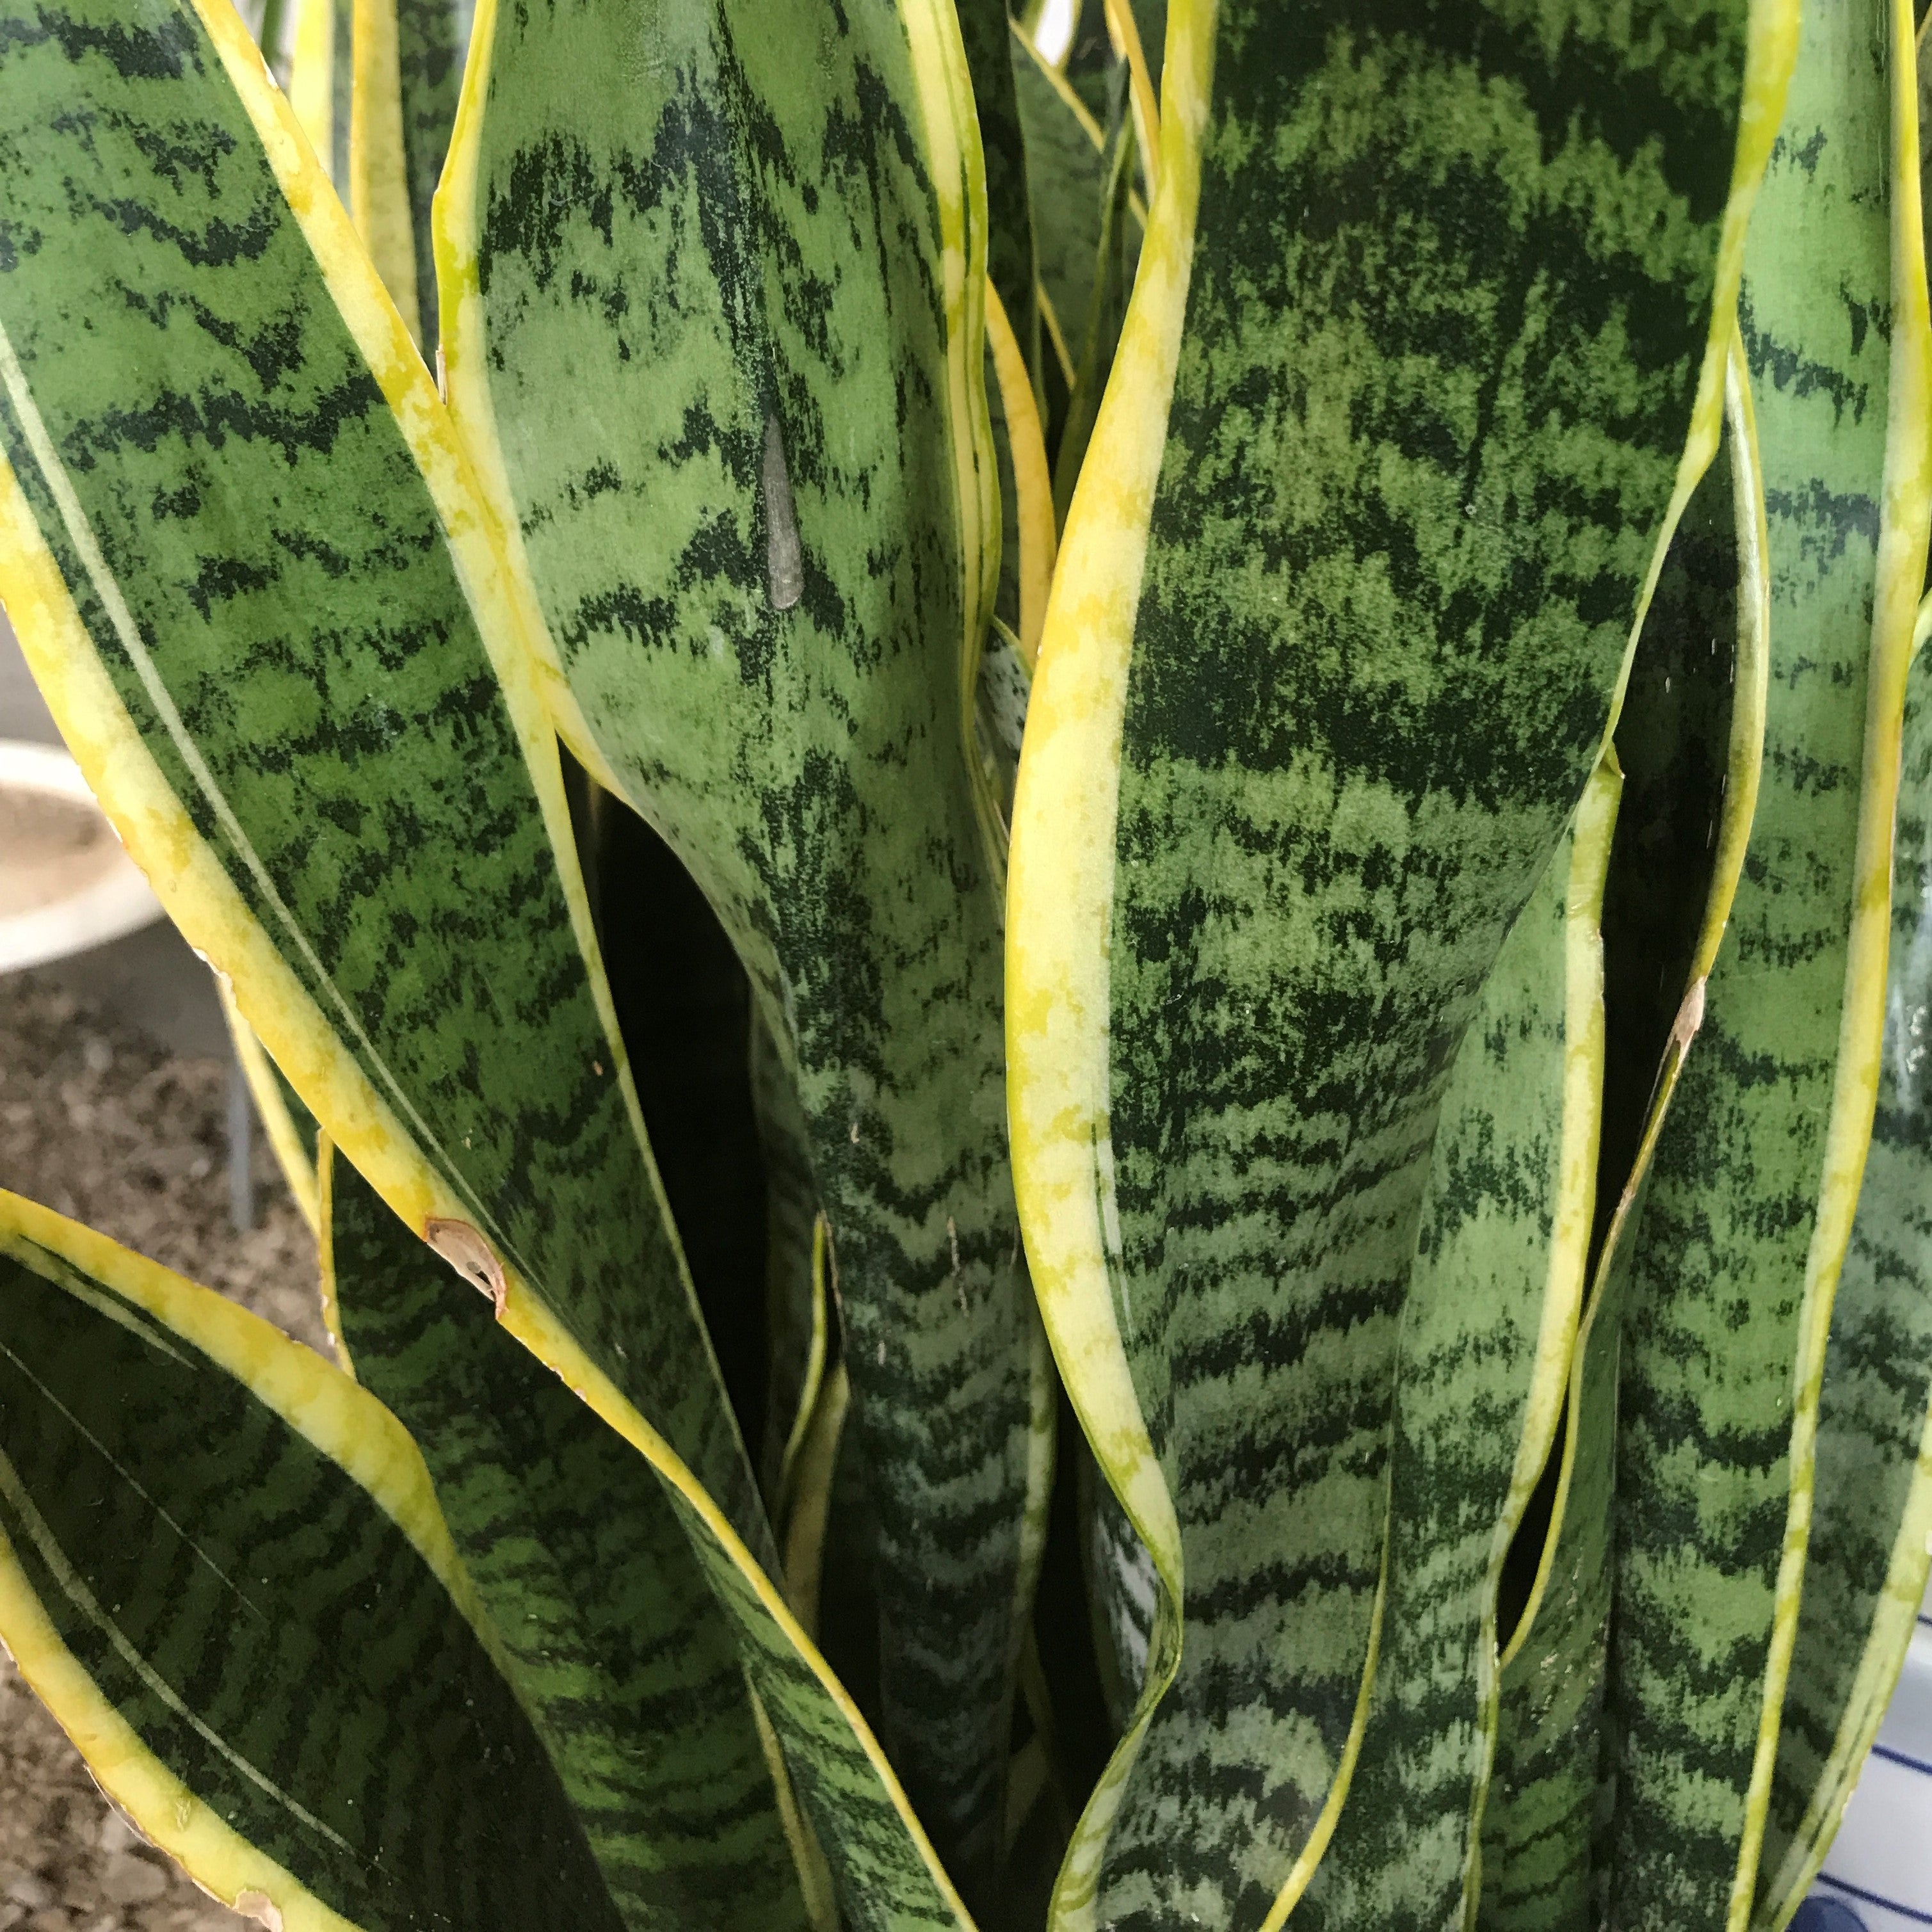 Sansevieria laurentii - Snake Plant, Mother-in-Law's Tongue